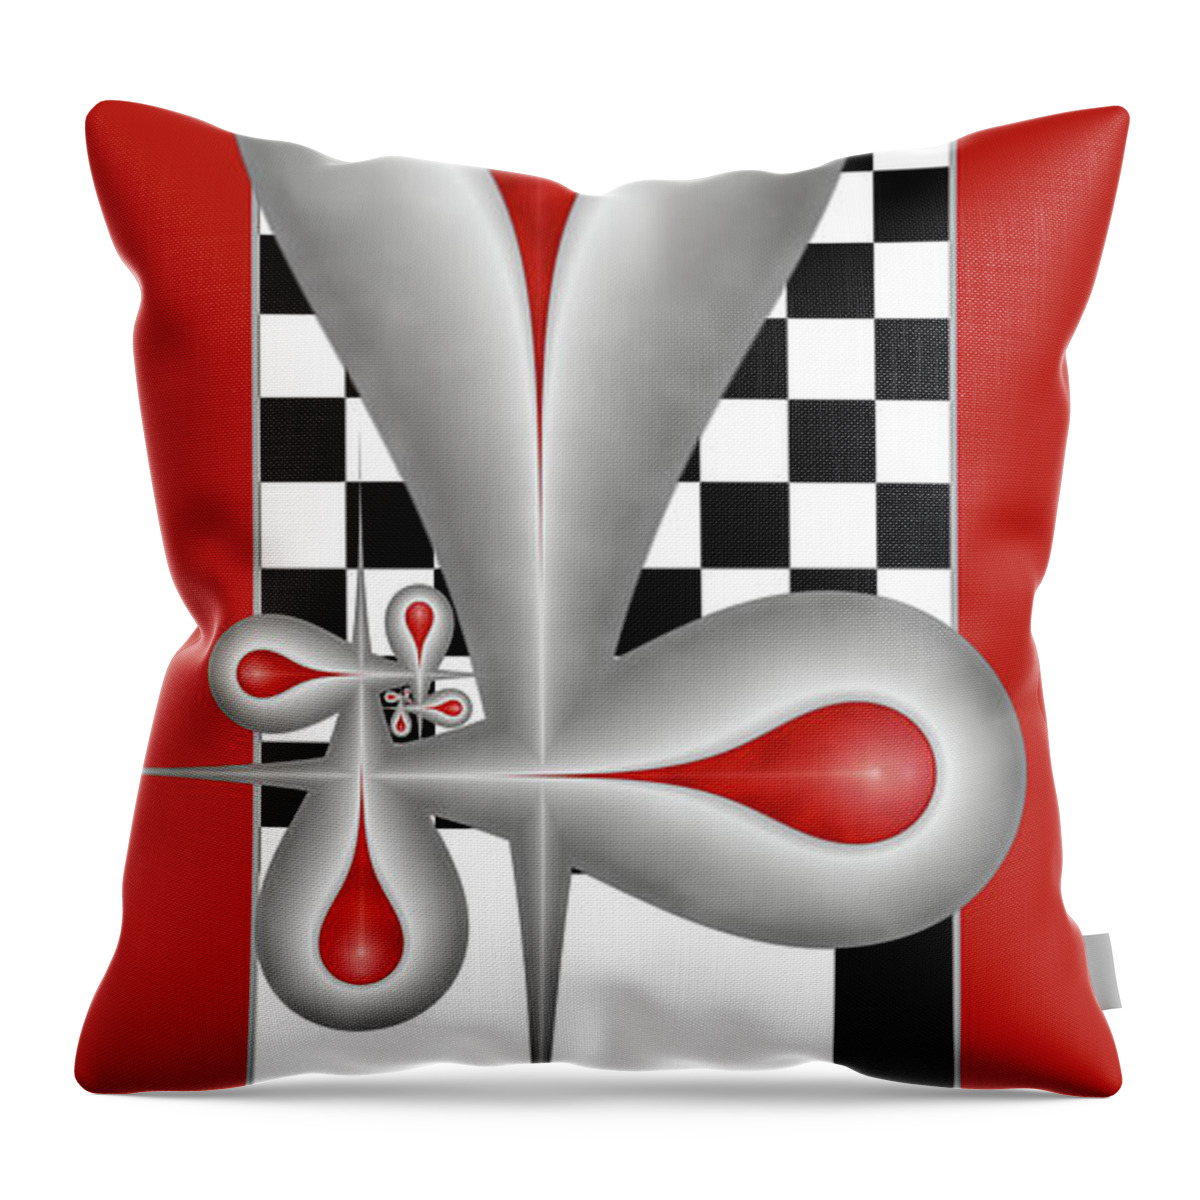 Drops Throw Pillow featuring the digital art Drops on a Chess Board by Gabiw Art